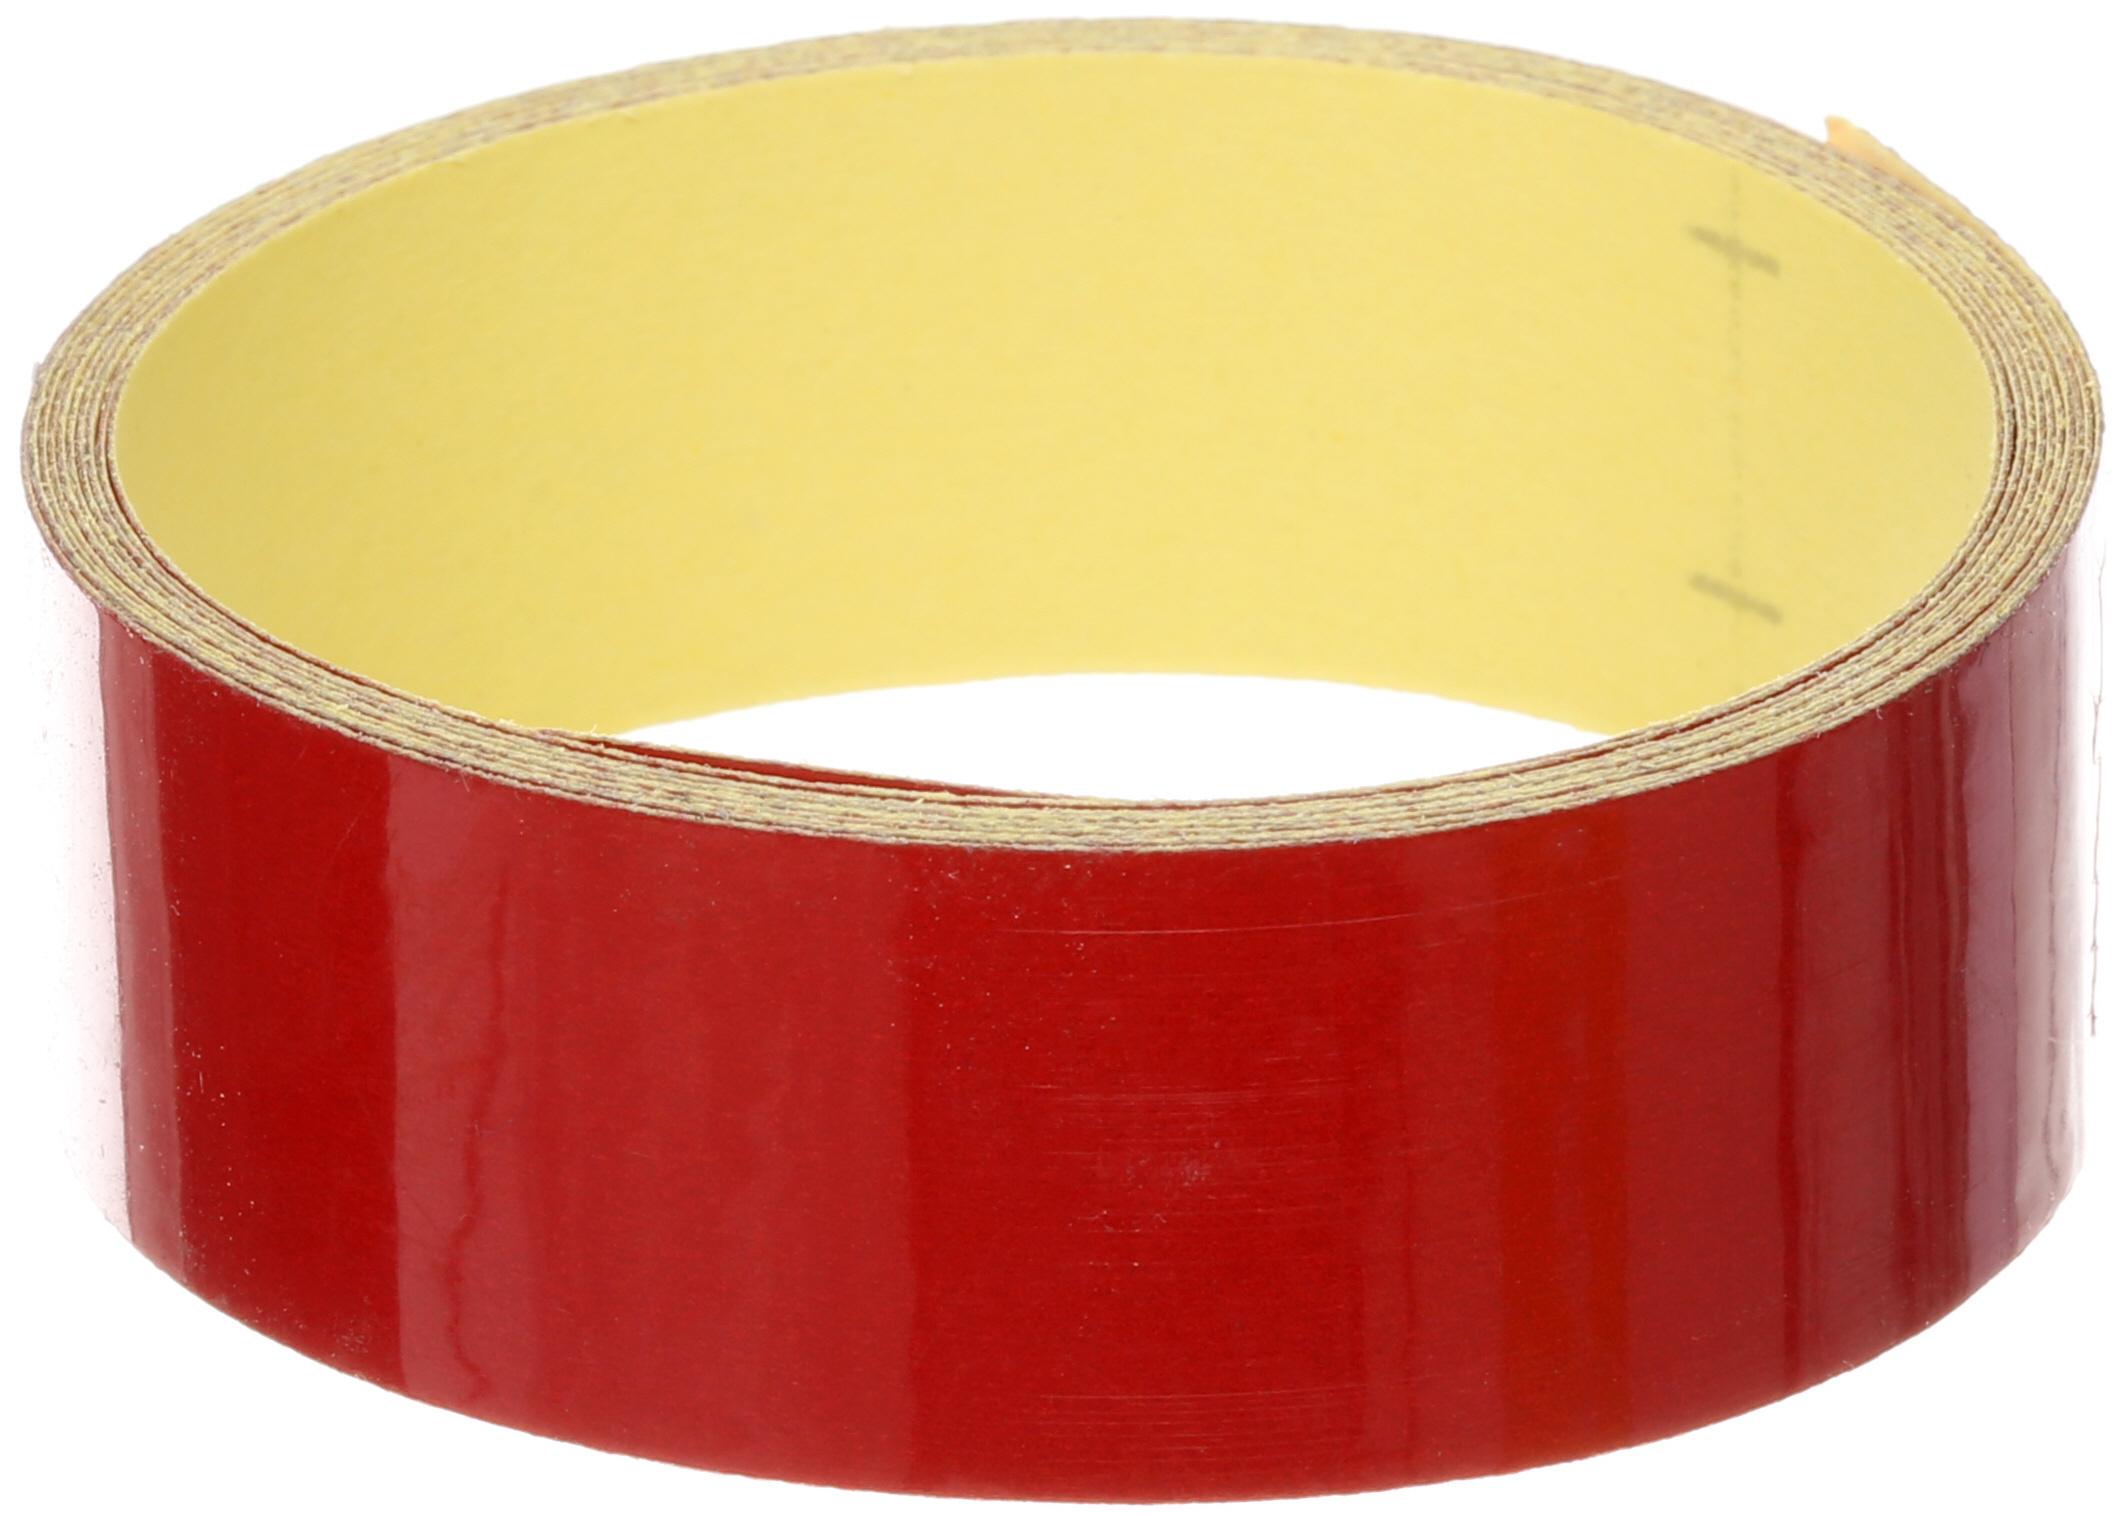 Summit Safety Reflective Tape 1530Mm X 19Mm - Red